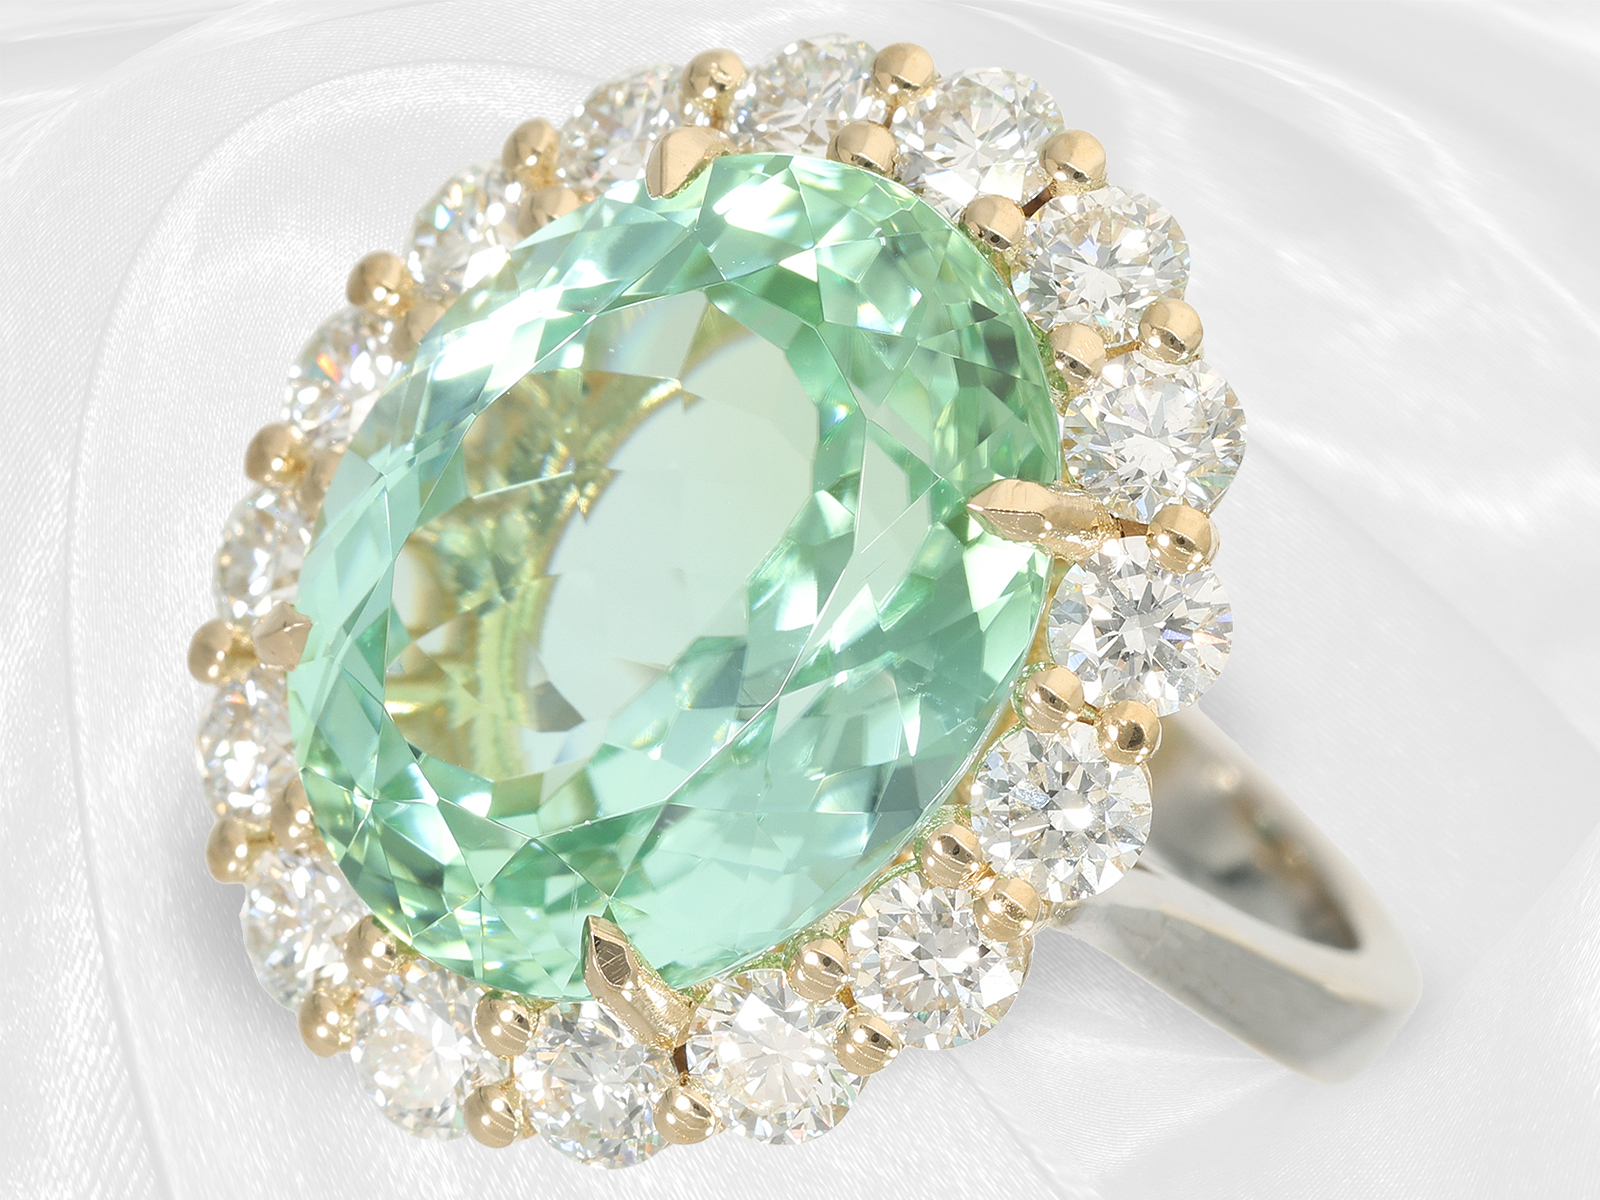 Ring: extremely high-quality tourmaline ring, eye-clean certified Paraiba of 15.06ct - Image 7 of 9